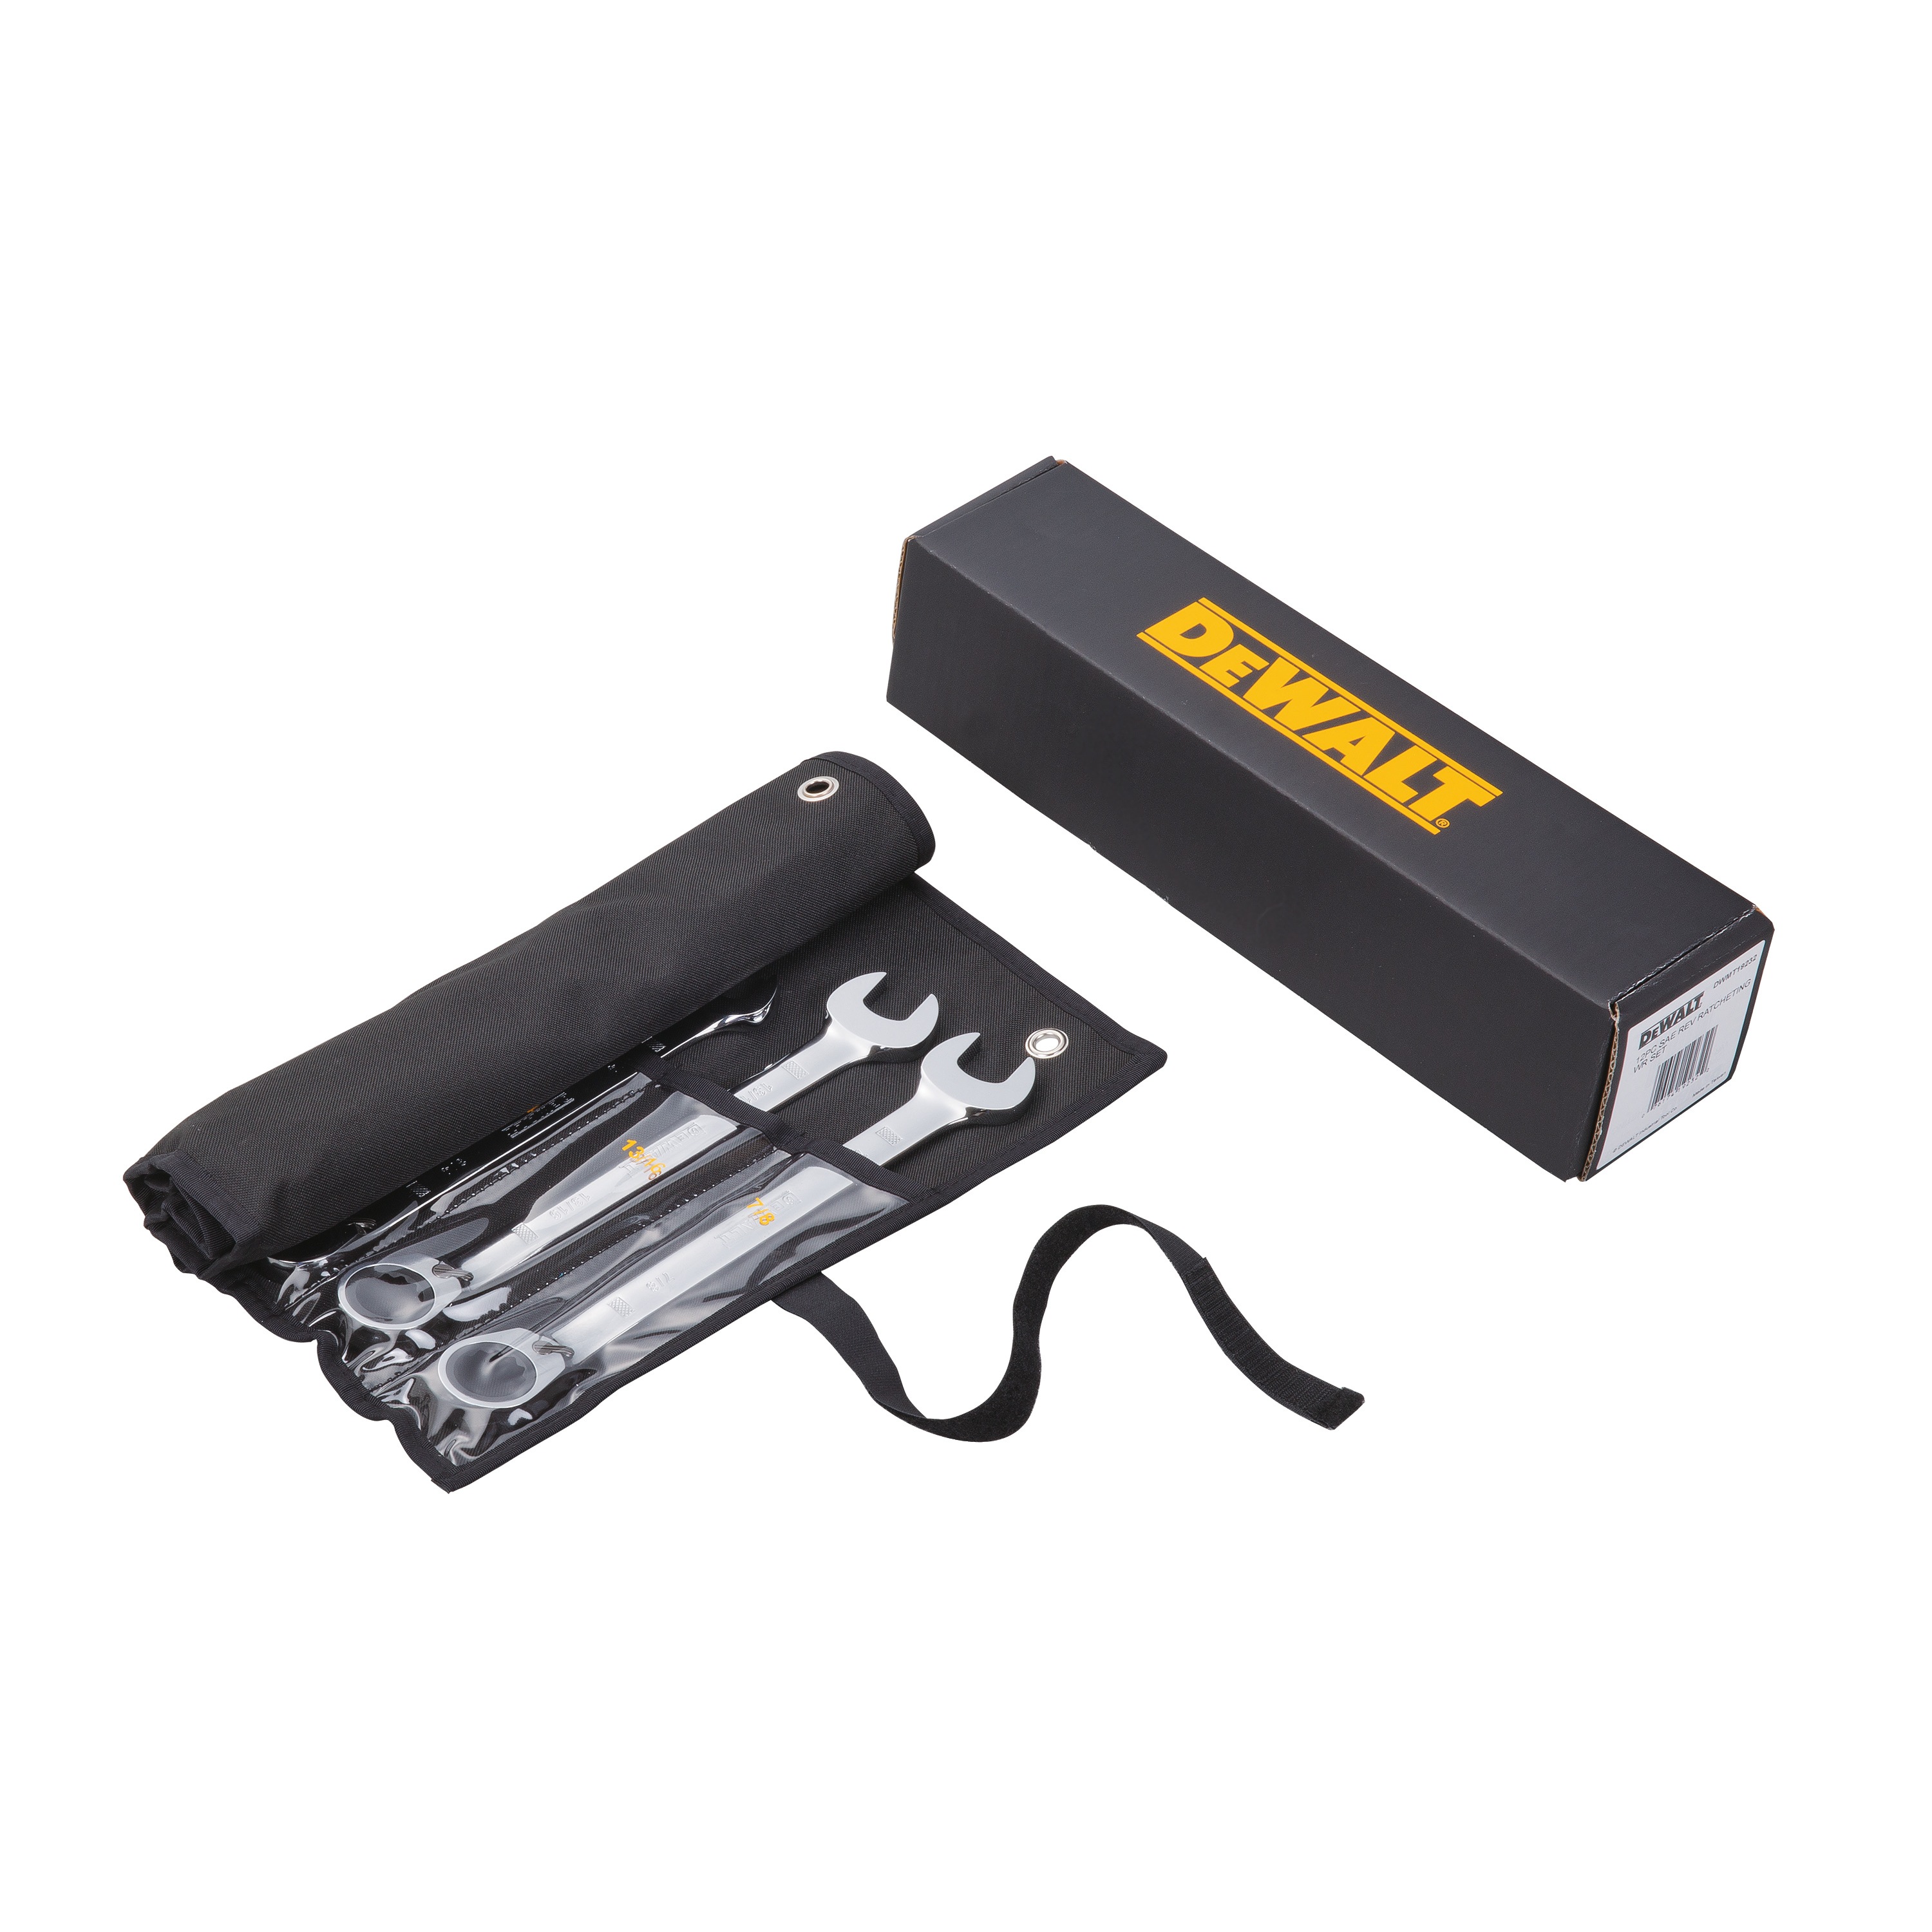 DEWALT 12 piece reversible ratcheting wrench set with its case.